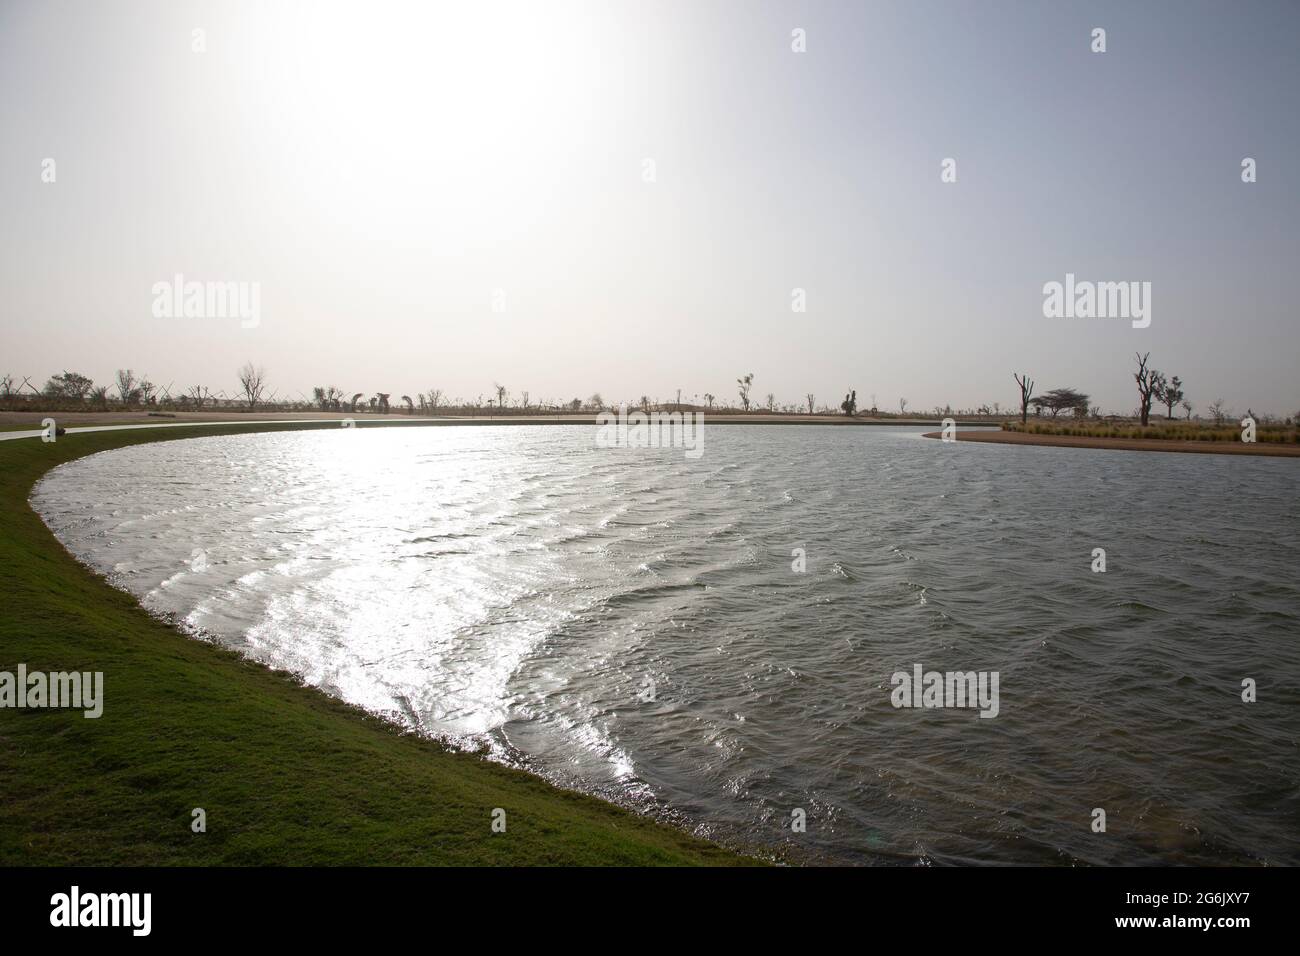 The Love Lakes in Al Qudra, Dubai, UAE. --- The Love Lakes Dubai are made up of two artificial heart shaped lakes. The lake is so big that it can be s Stock Photo